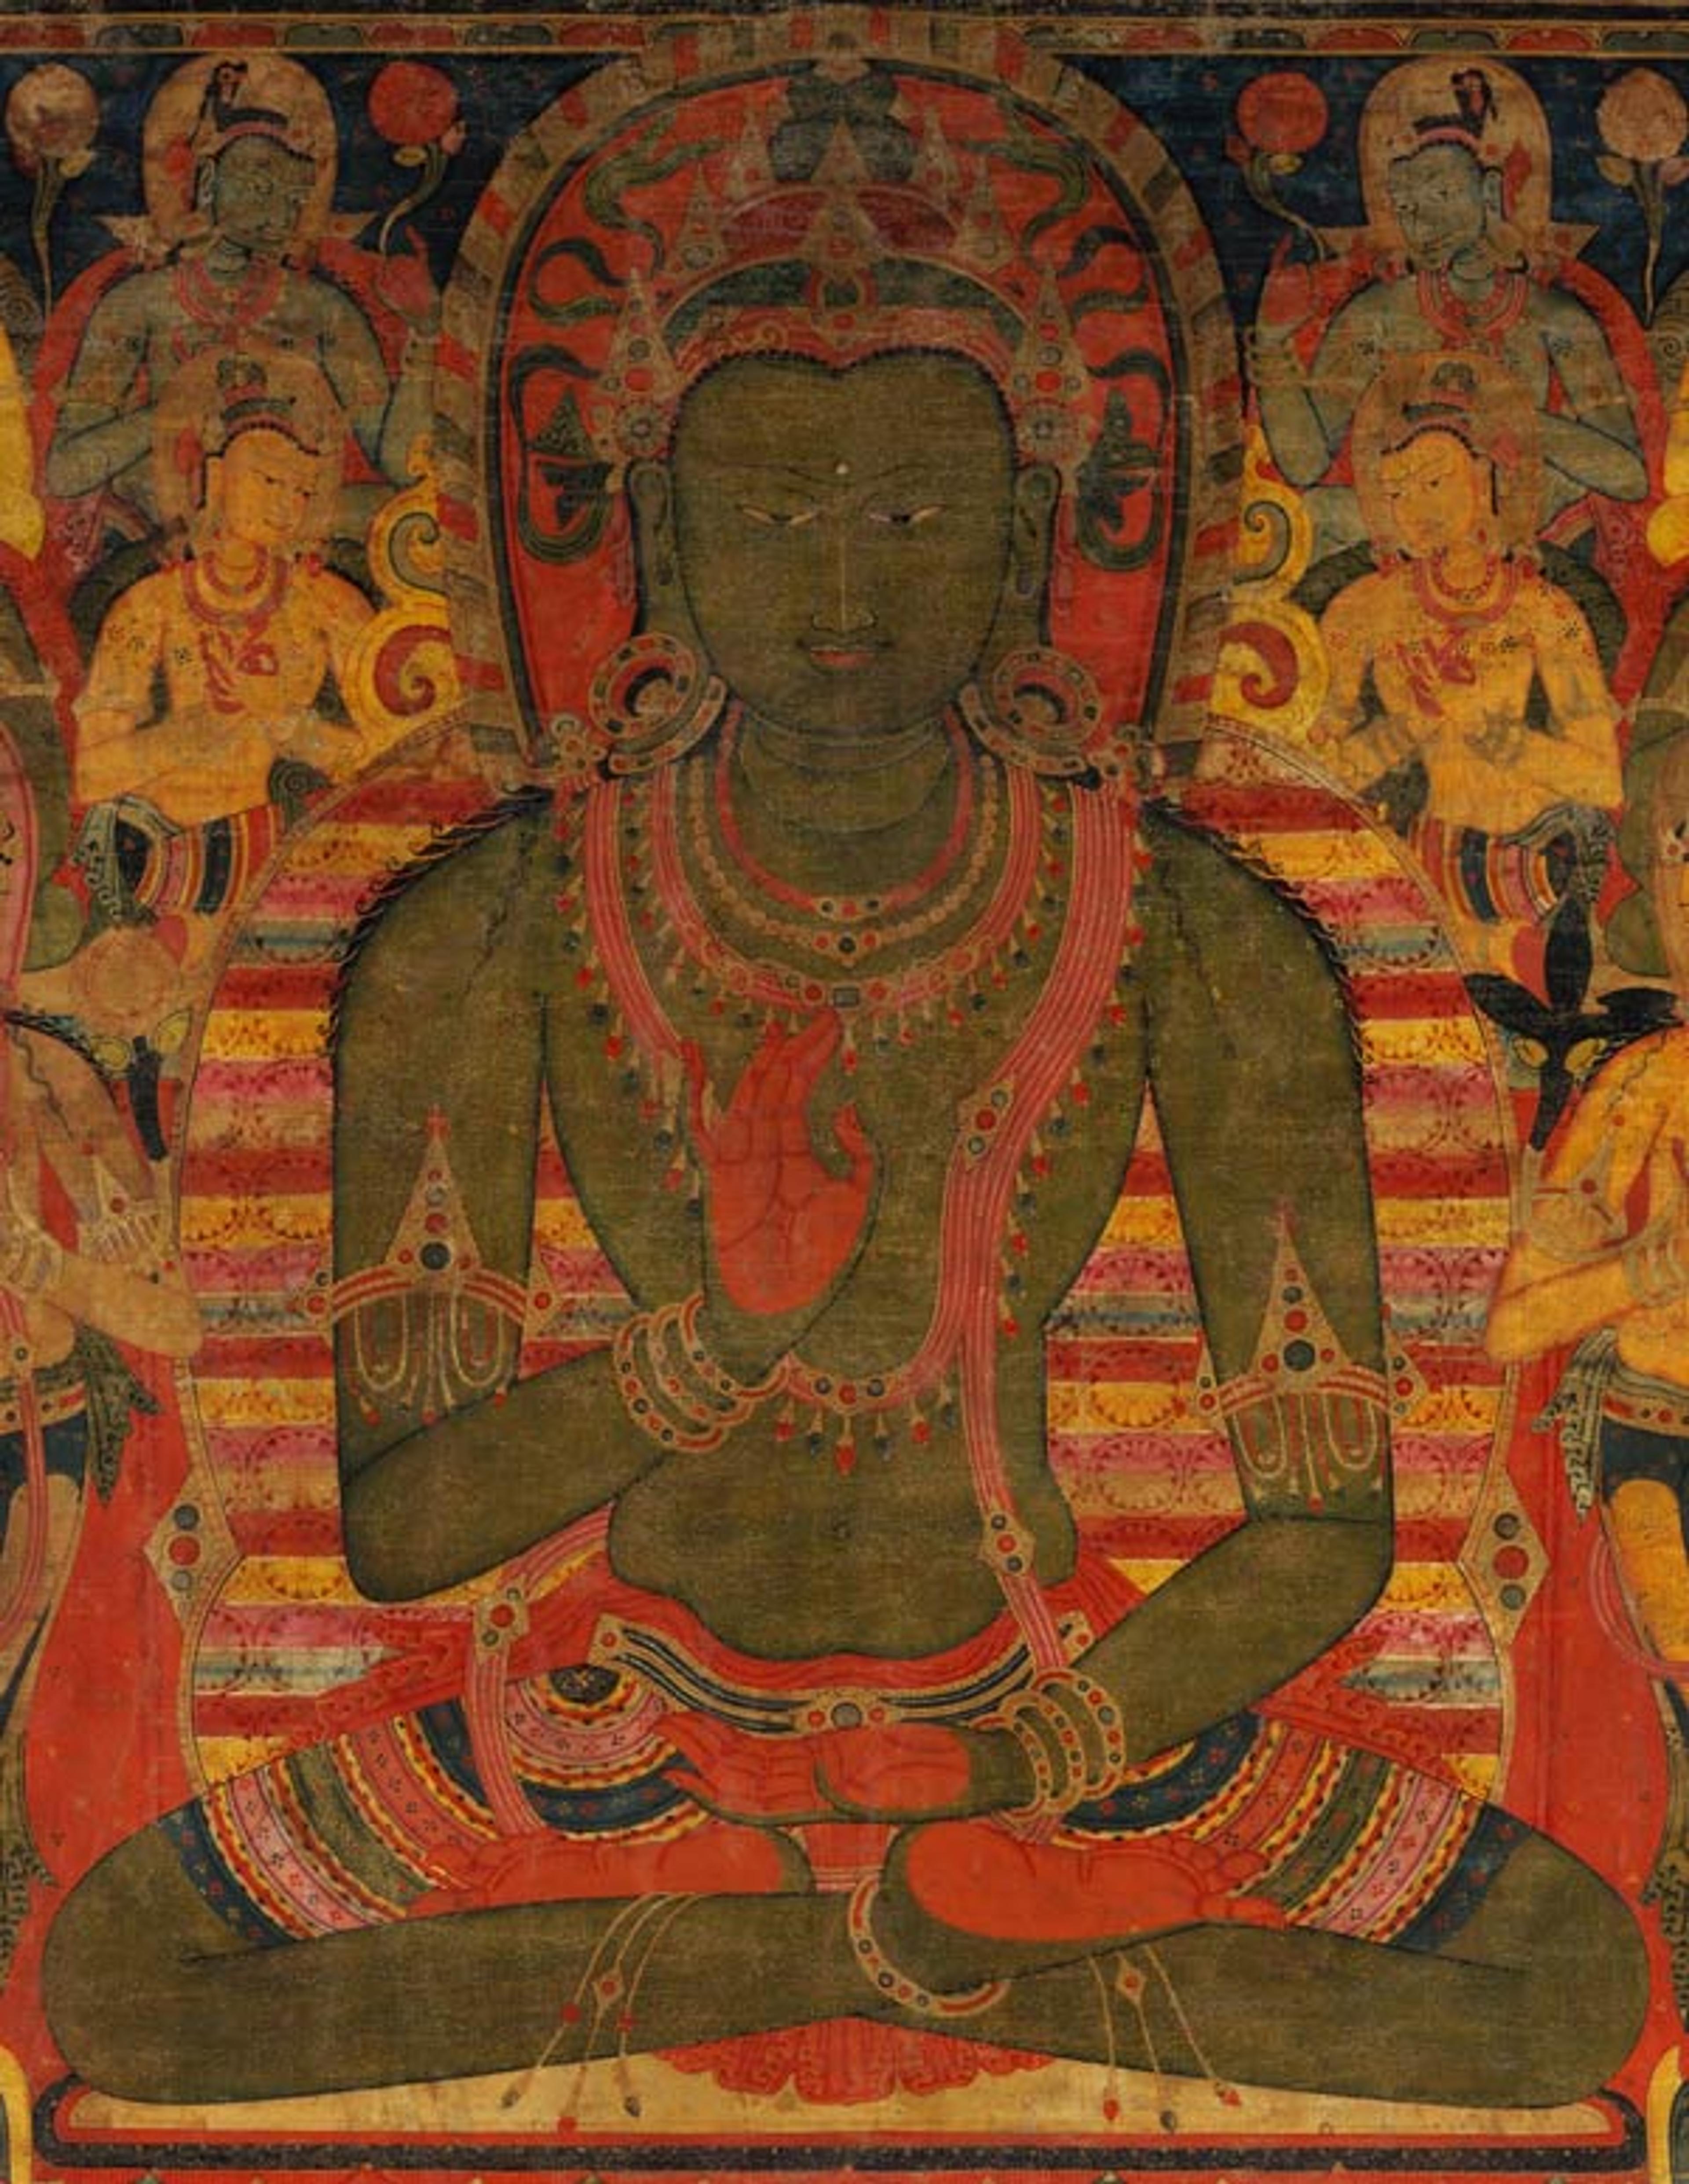 Buddha Amoghasiddhi with Eight Bodhisattvas (detail of central figure), ca. 1200–1250. Central Tibet. Distemper on cloth; 27 1/8 x 21 1/4 in. (68.9 x 54 cm). The Metropolitan Museum of Art, New York, Purchase, Miriam and Ira D. Wallach Philanthropic Fund Gift, 1991 (1991.74)